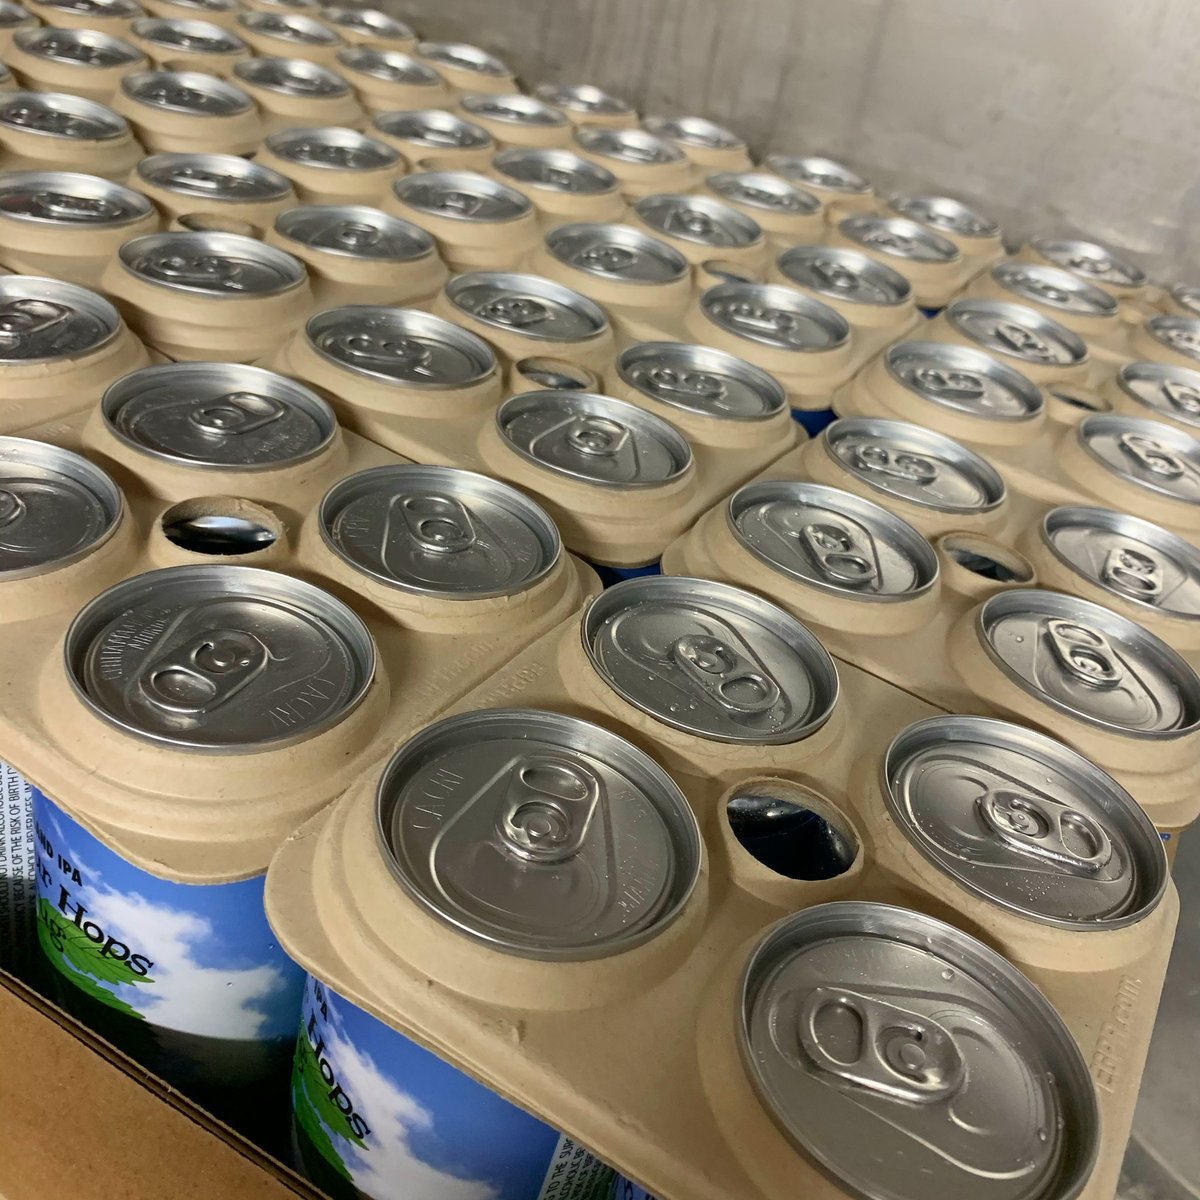 Cheers to eco-friendly canning. @state_64 #e6pr #cans #independent #craftbeer #newcans #ecofriendly #MAbeer #state64 #moonhillbrewing #gardneralehouse